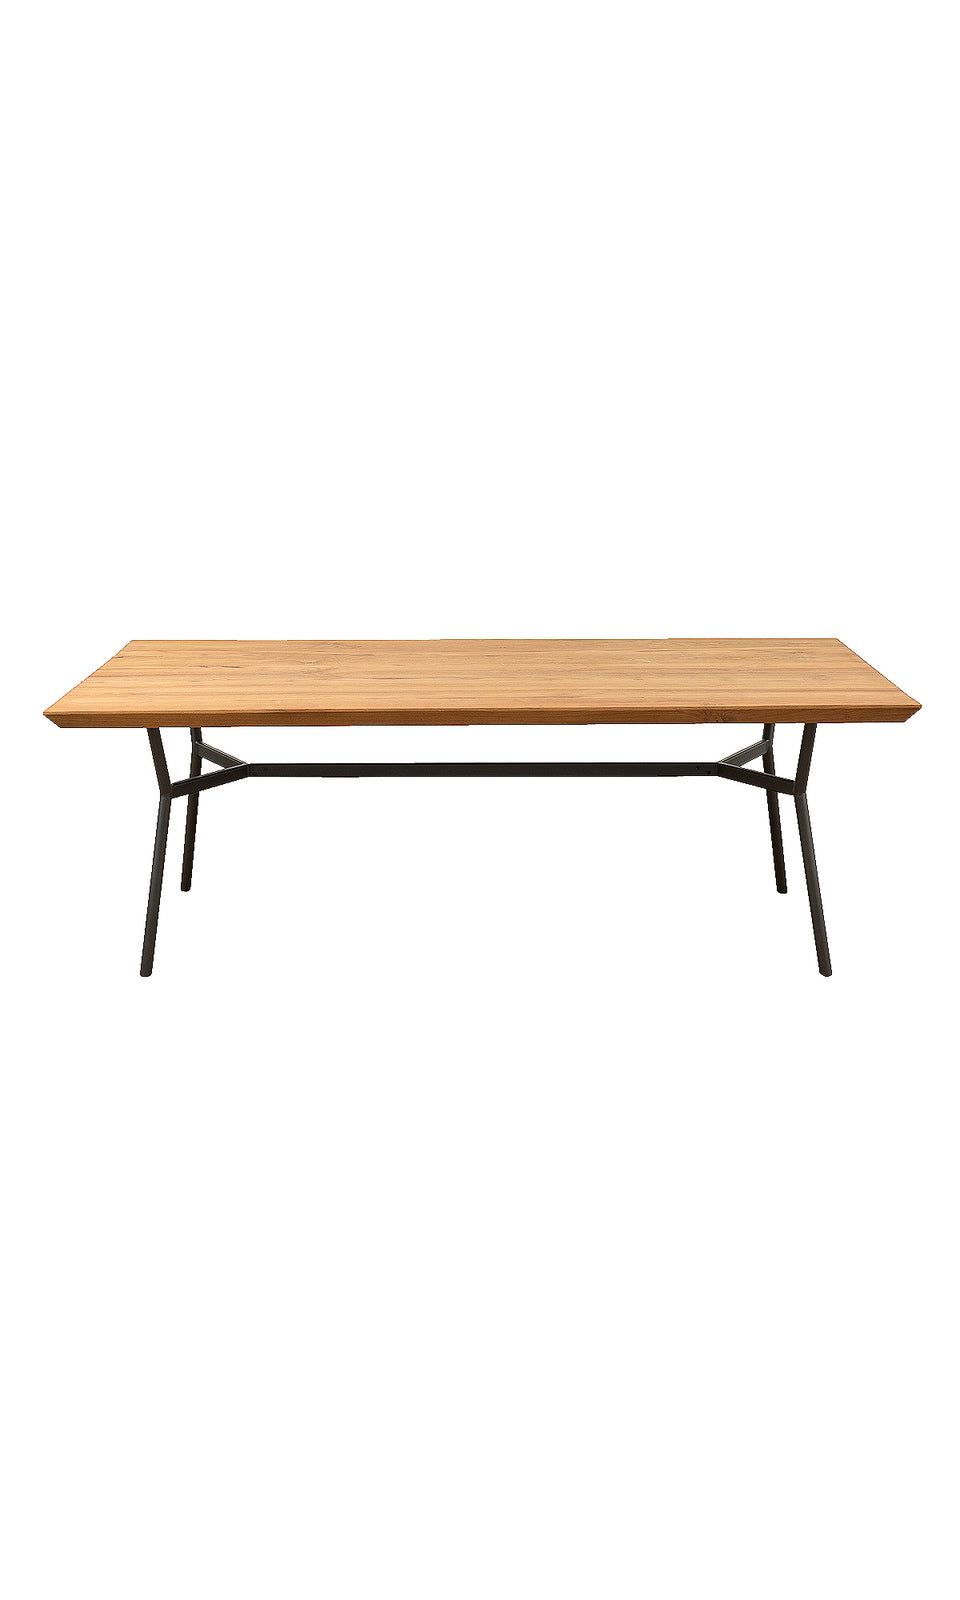 Bayan Teak Dining Table with H-shaped Metal Legs